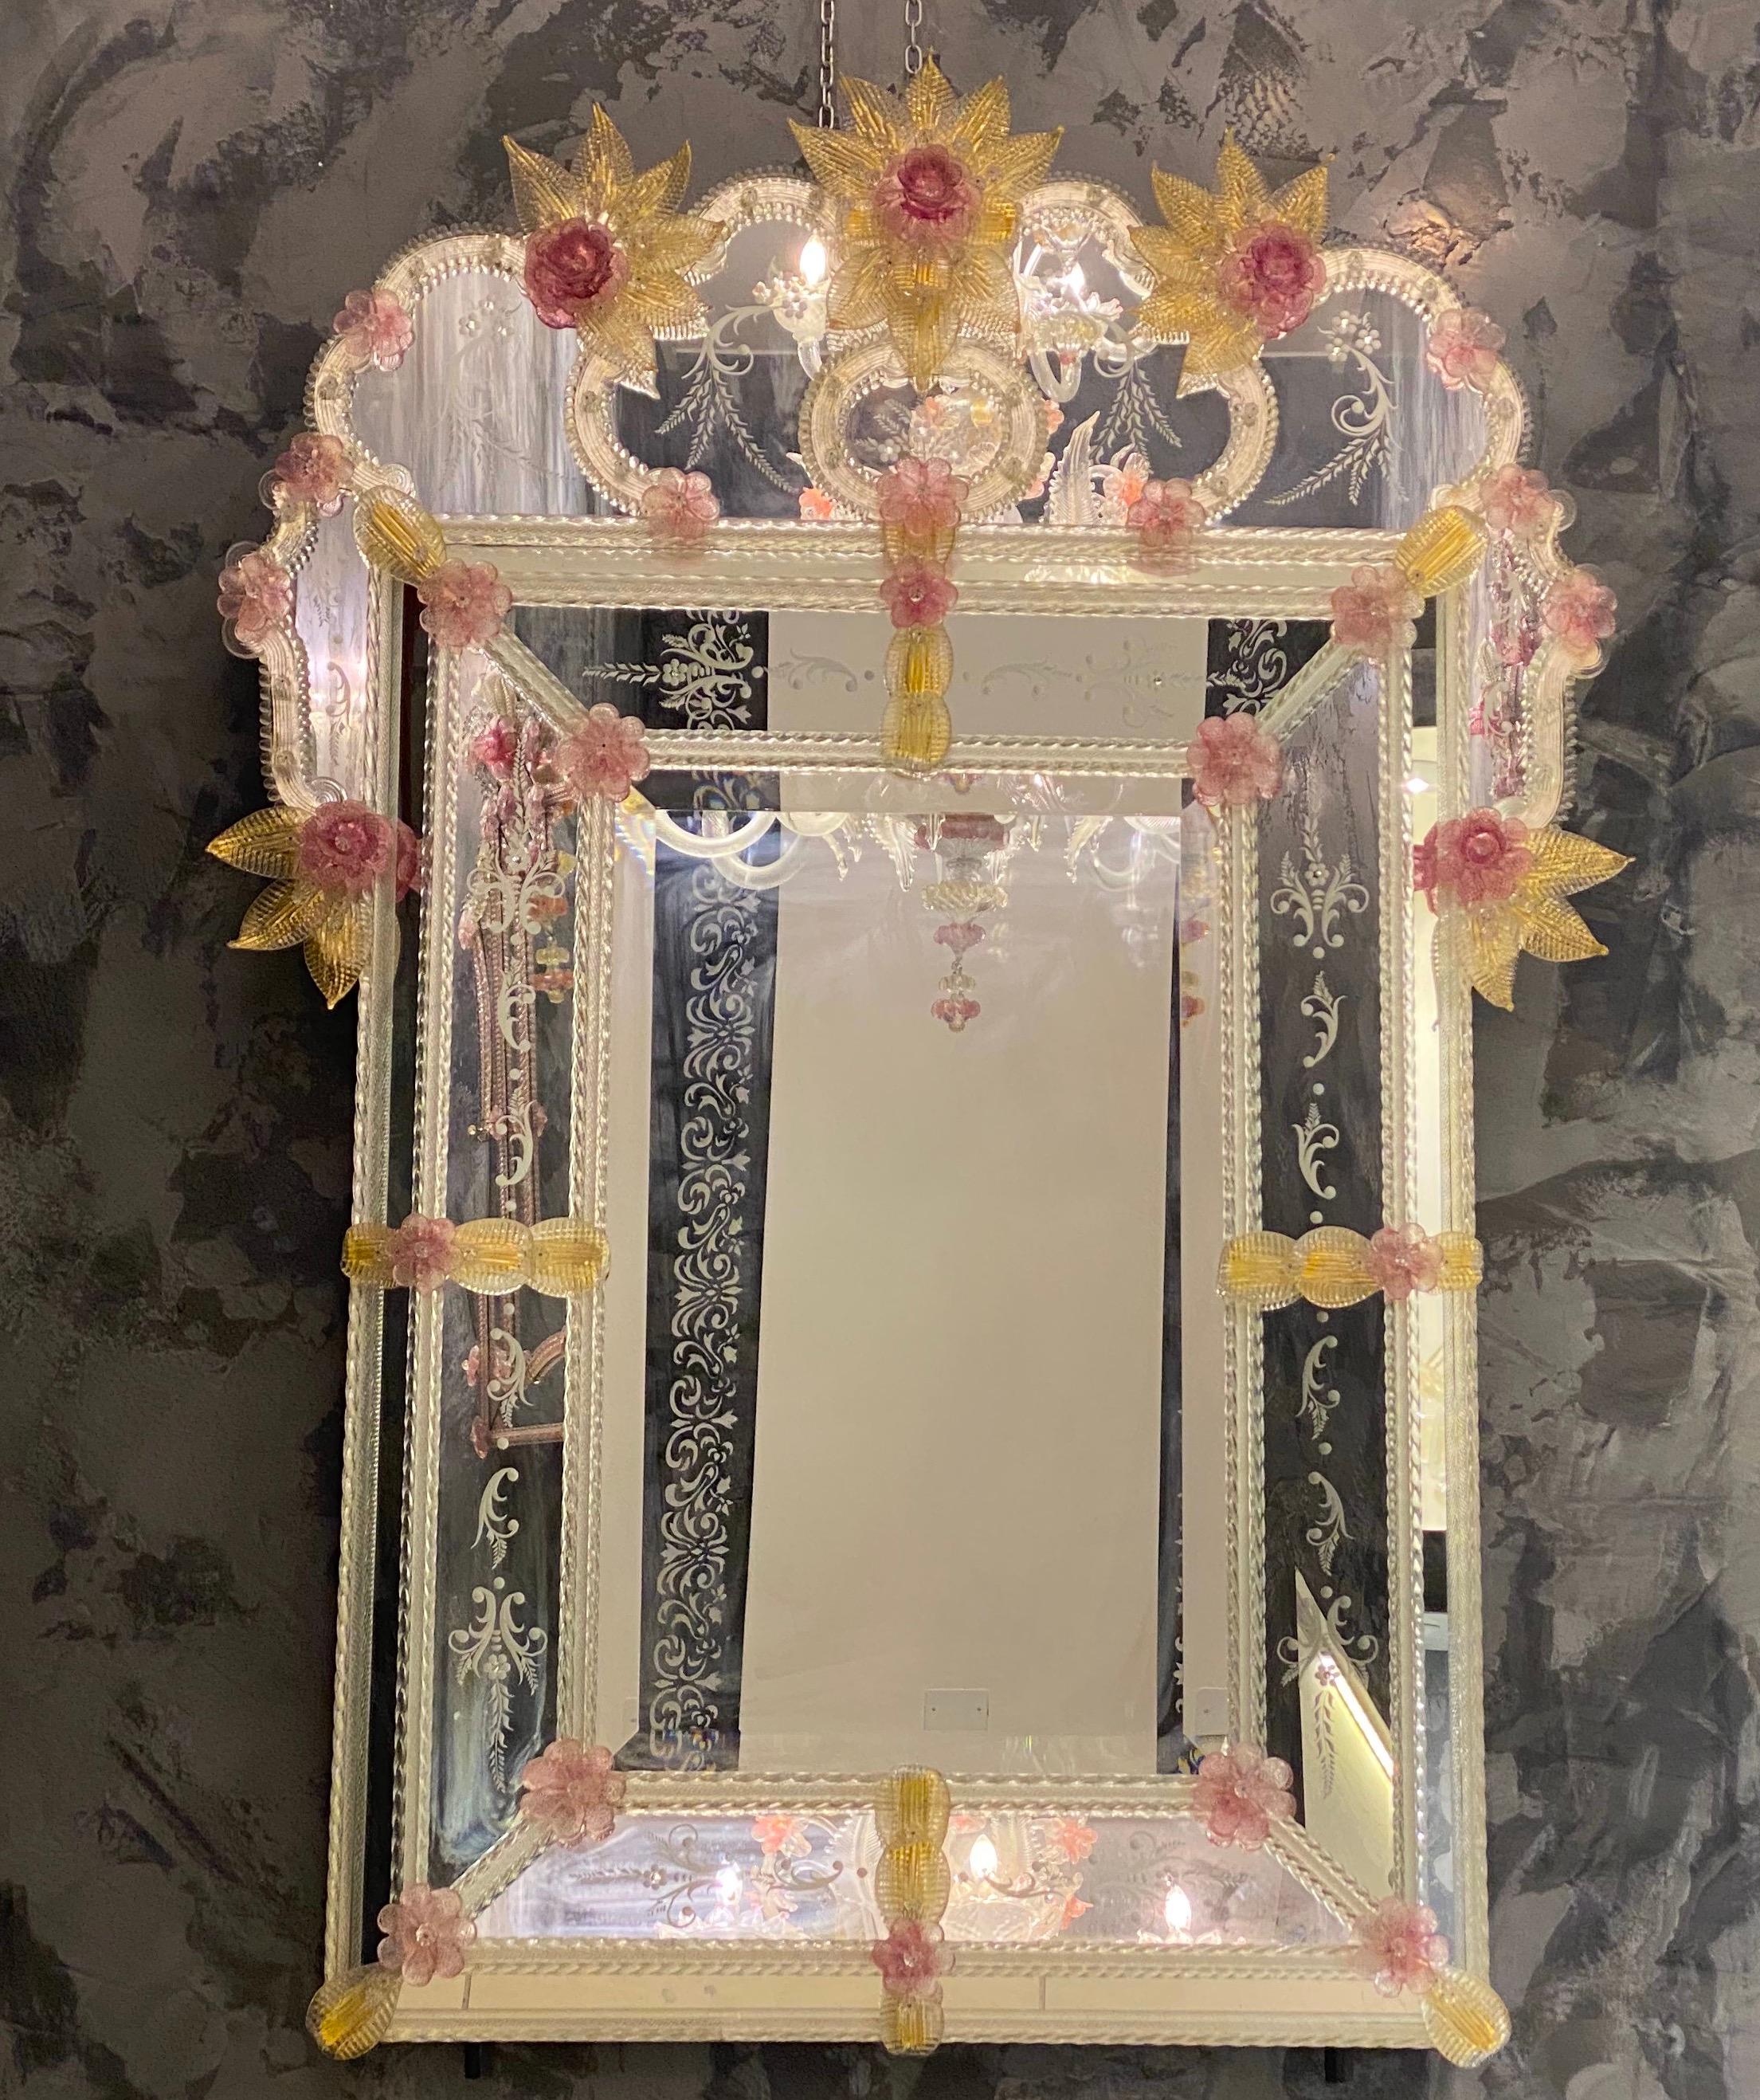 This enchanting Venetian mirror features etched floral motifs adorning the mirrored frame. Along the edges of the frame are glass rope accents and numerous glass pink flowers gold leaves. 
Executed by the great Master of Murano.
Excellent